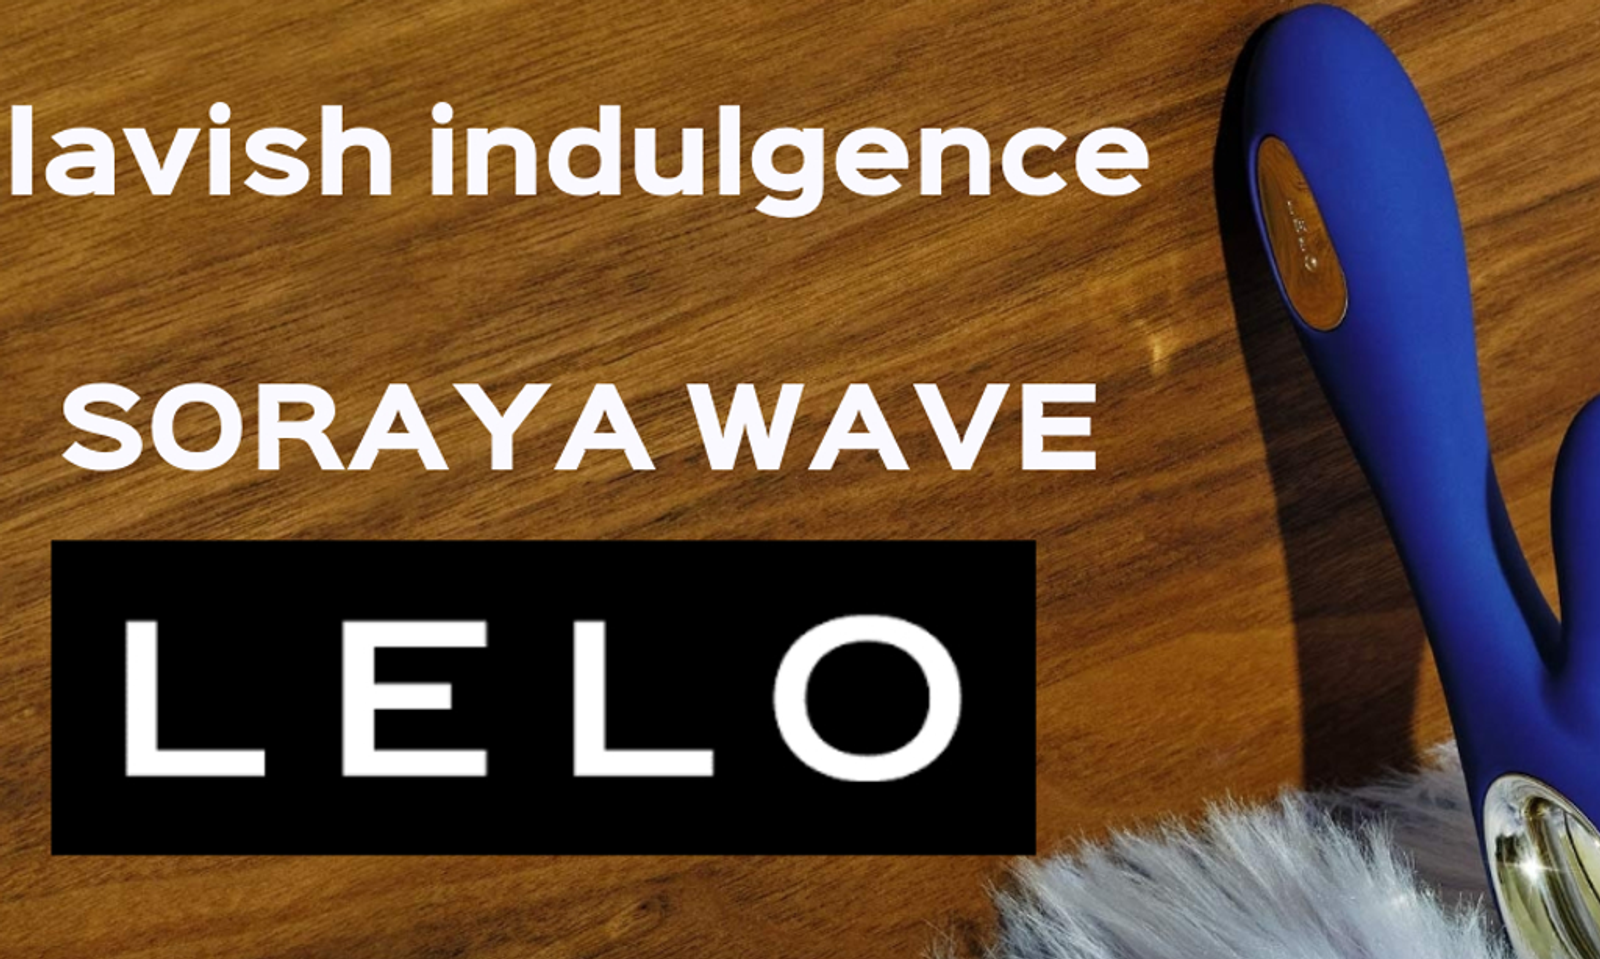 Williams Trading Co. Is Now Shipping the Lelo Soraya Wave